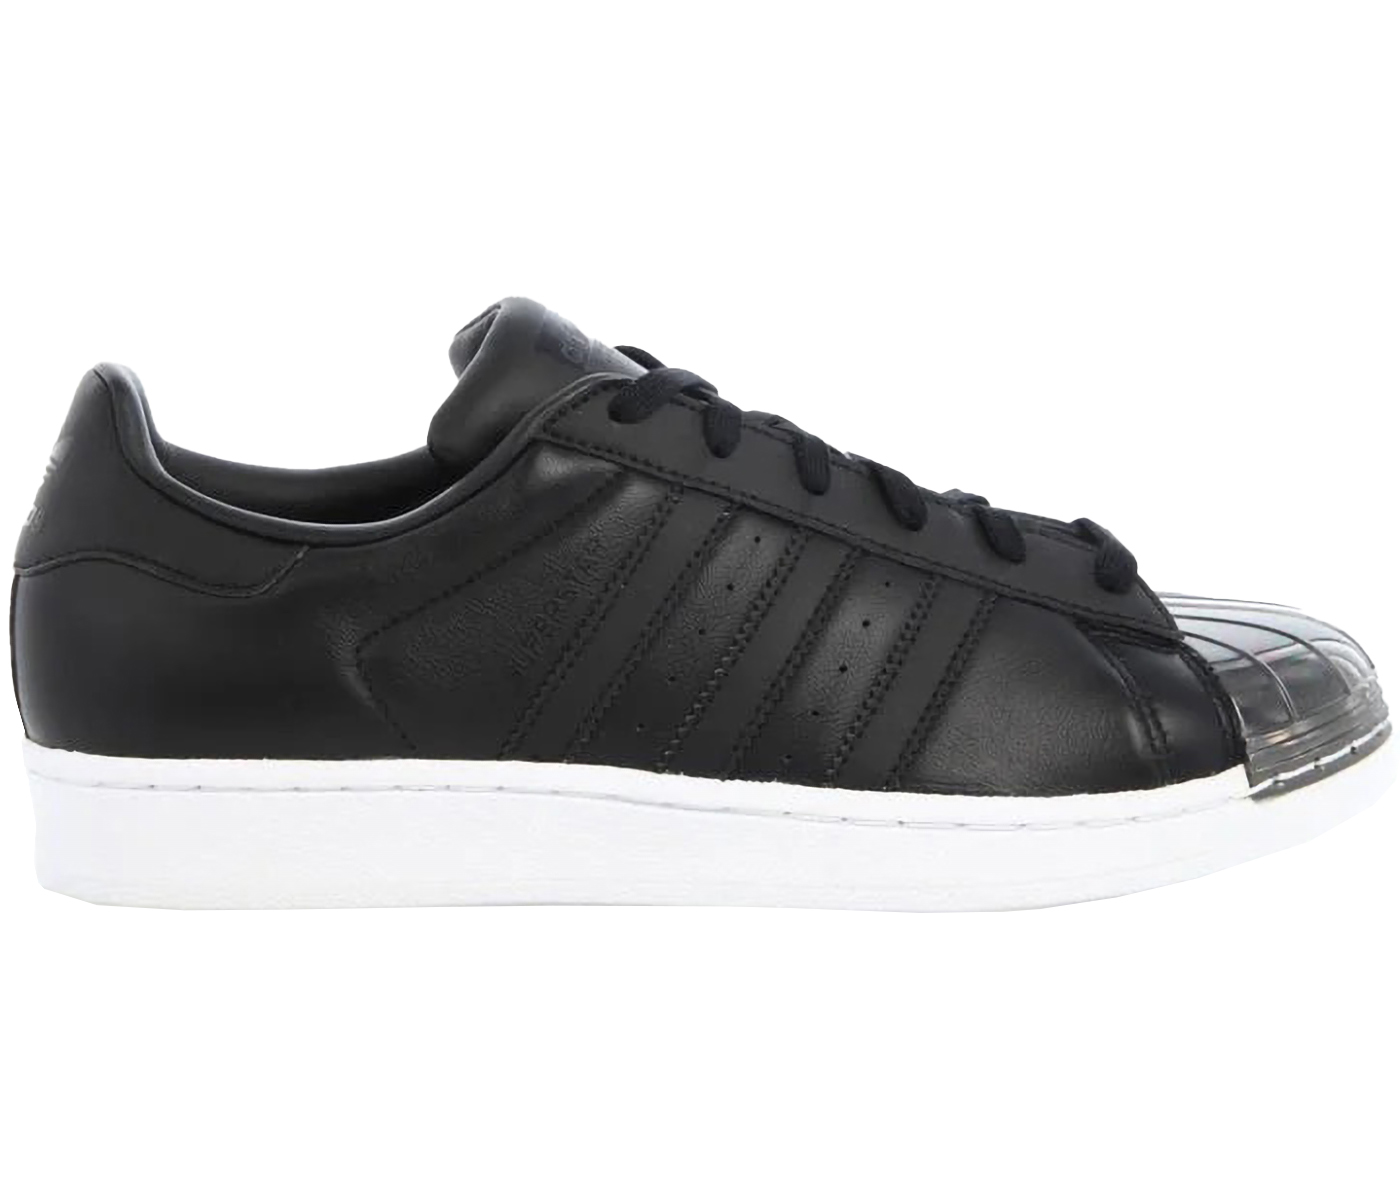 adidas Superstar Metal Toe Core Black White (Women's) - BY2883 - US